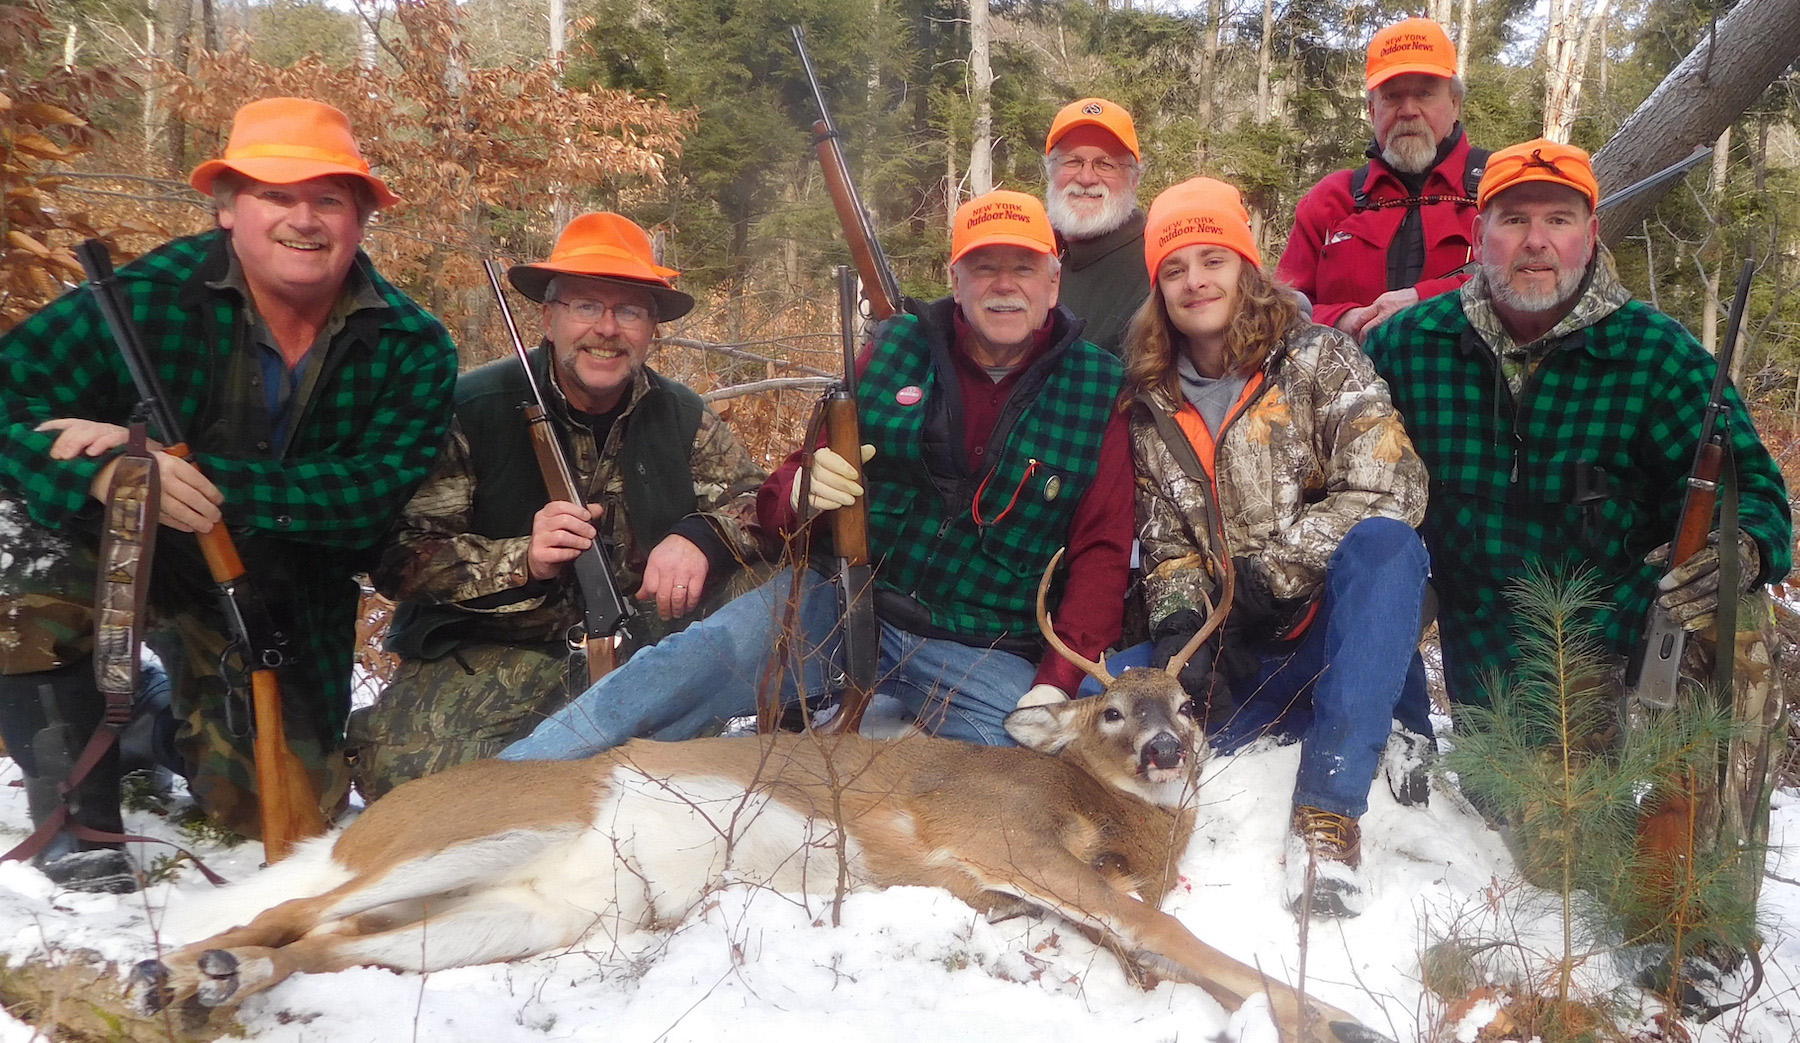 2021: Mike Currie, of Warrensburgh, shot this 7-pointer on the Dec. 5 while hunting with the Iron Sight Gang in Hogtown, Washington County. His grandson, Max, was with him at the time.